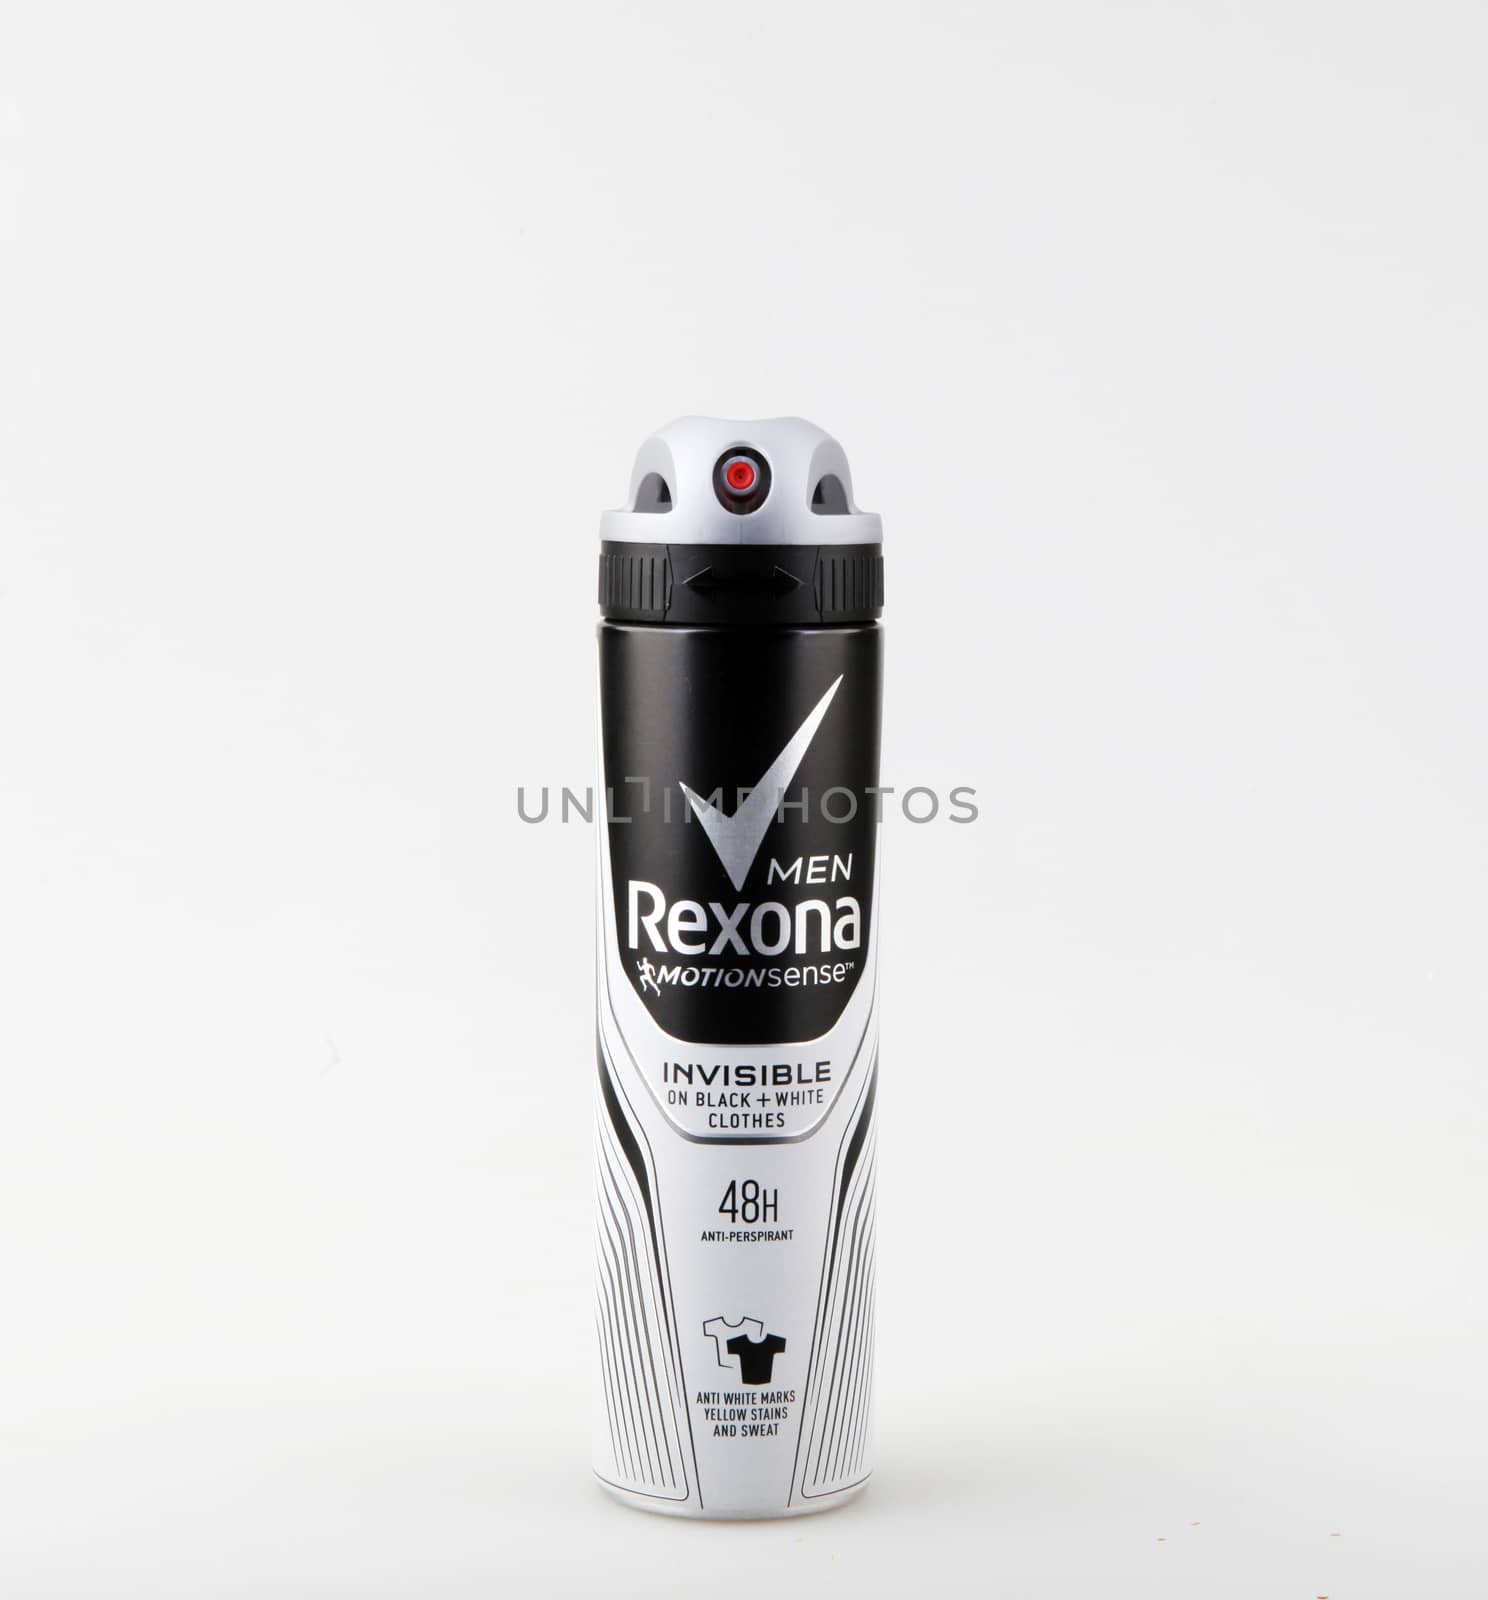 Pomorie, Bulgaria - June 23, 2019: Rexona Is A Deodorant And Antiperspirant Brand Created In Australia And Manufactured By Unilever. by nenovbrothers